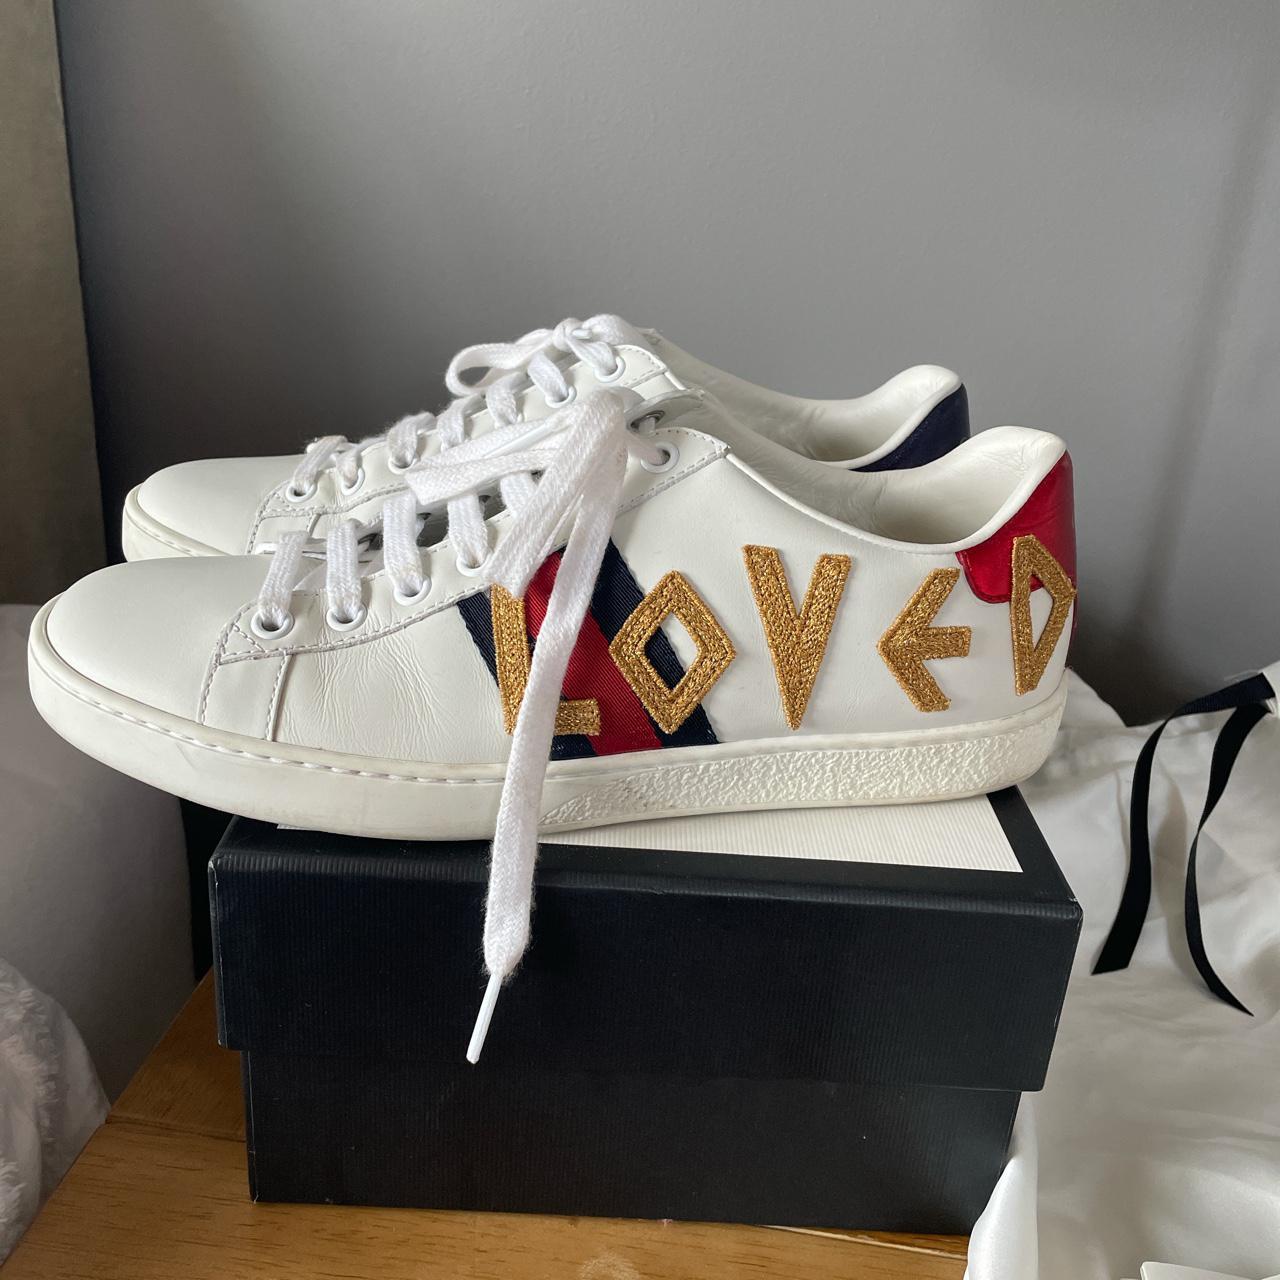 Product Image 3 - Authentic Gucci trainers. Work a